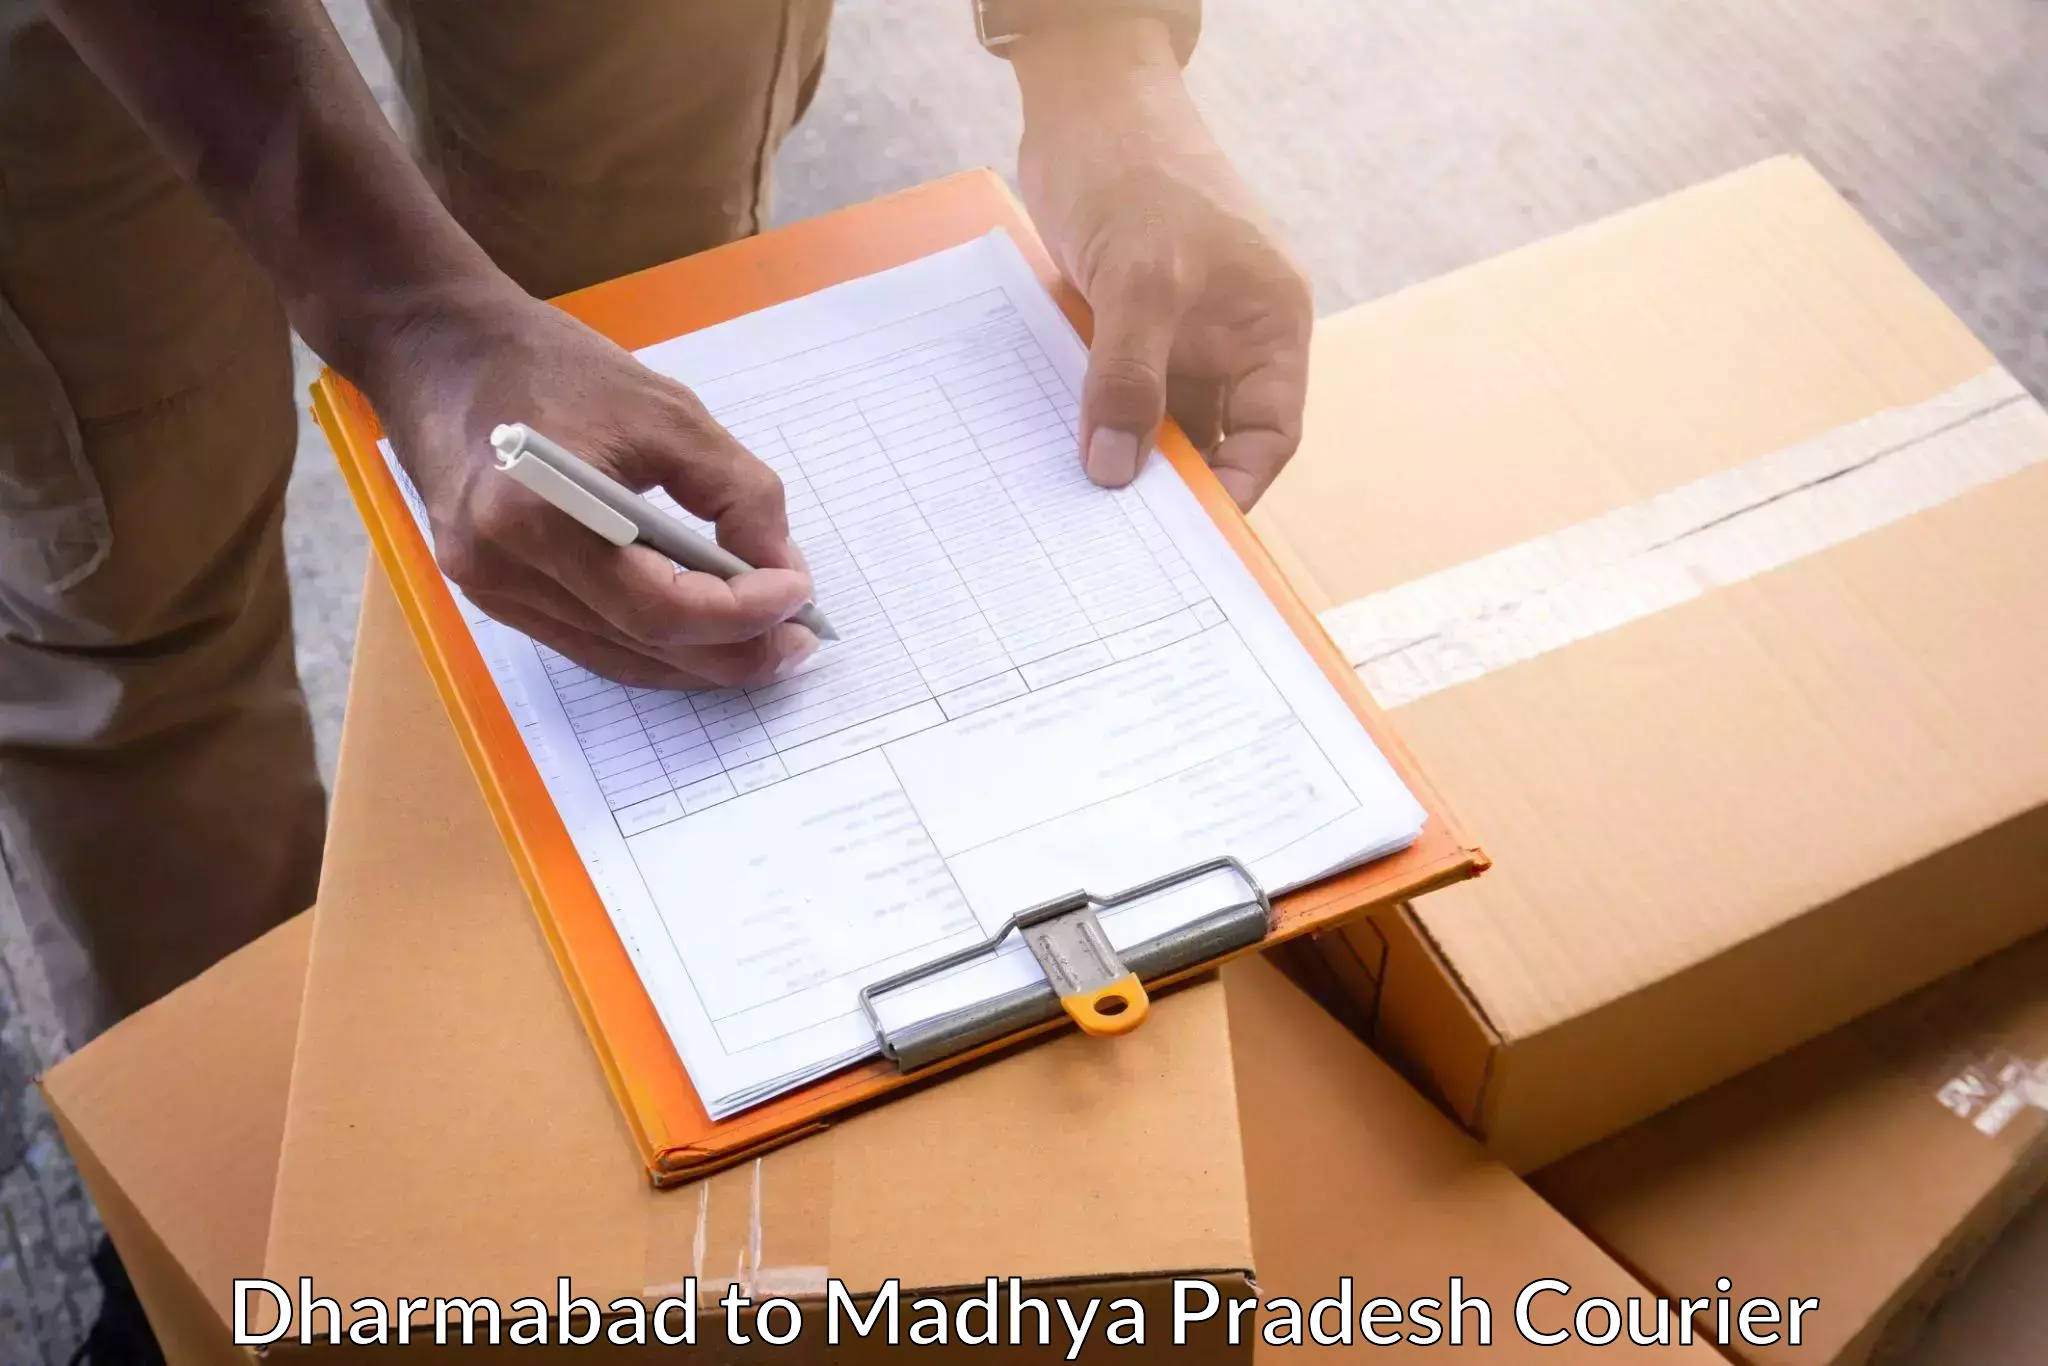 Professional courier handling Dharmabad to Sardarpur